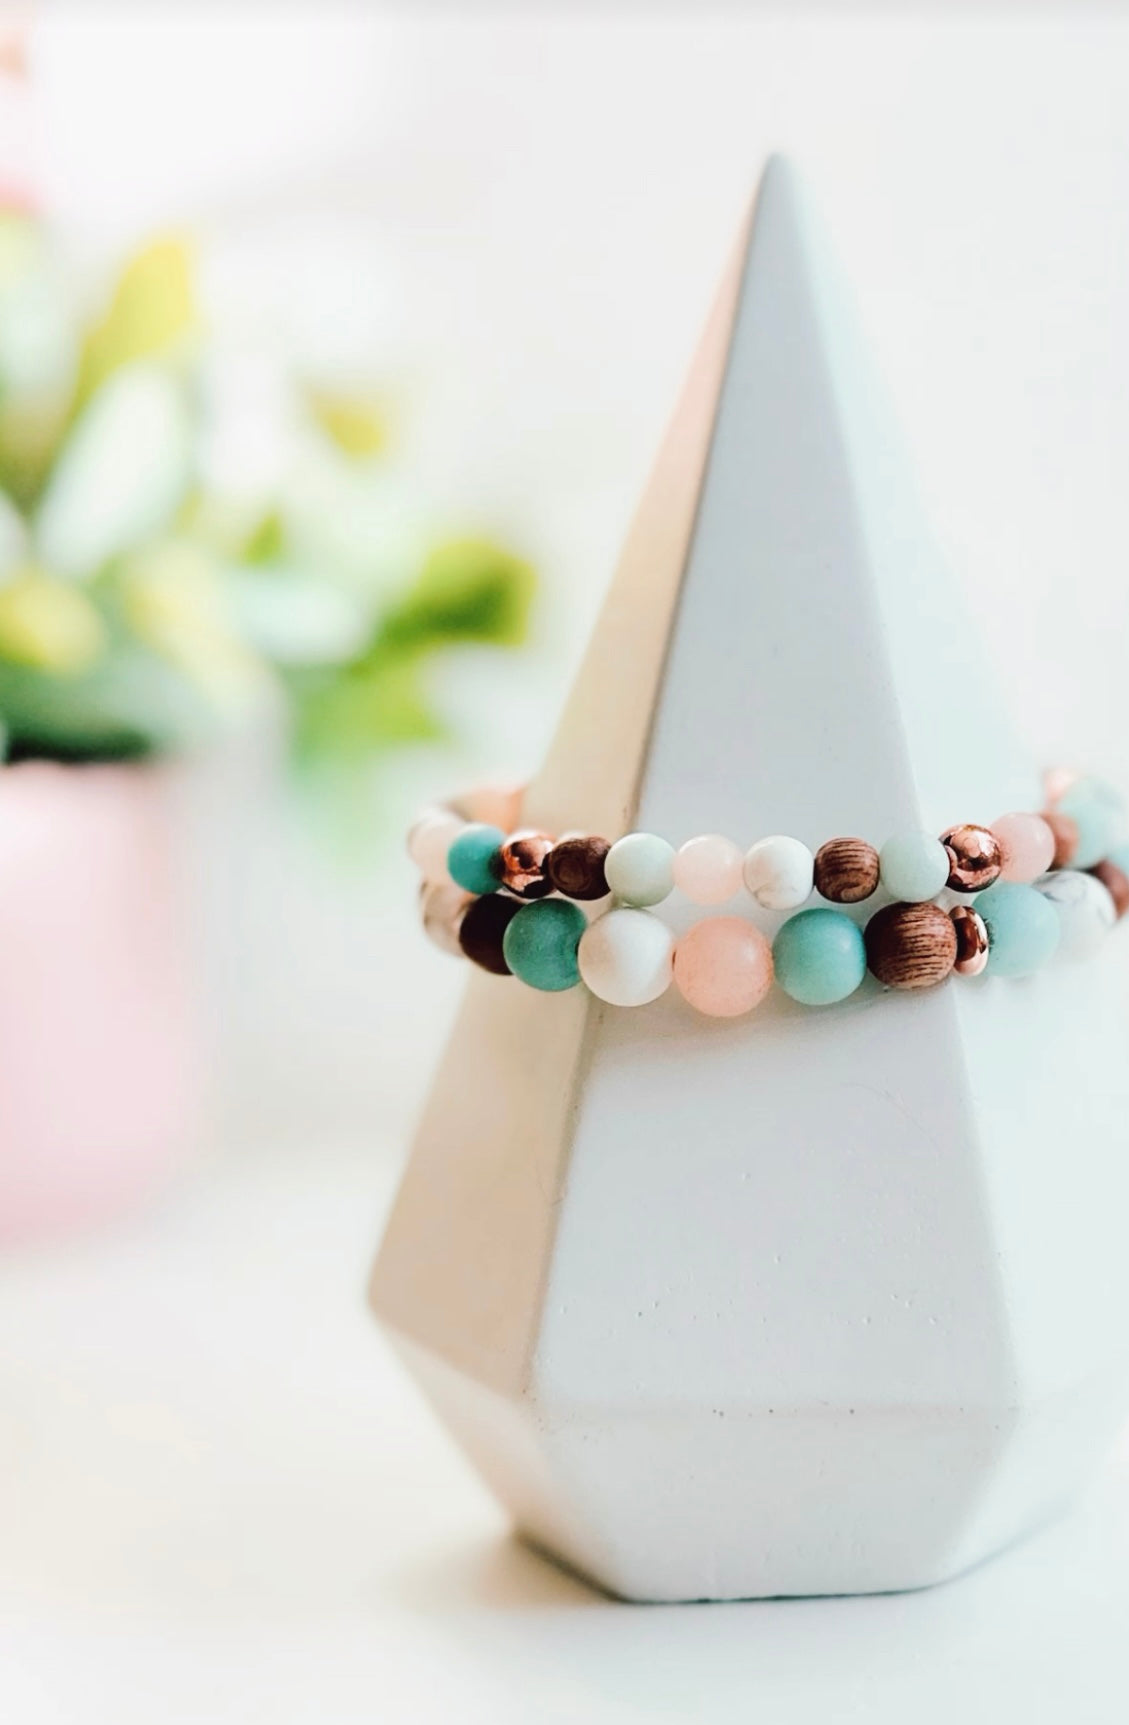 "The Energy Lifting Set," a meticulously crafted collection of gemstone bracelets designed to elevate your energy and promote well-being. This set features a harmonious blend of matte Sunstone, Amazonite, Howlite, and Rosewood, each selected for its unique healing properties.